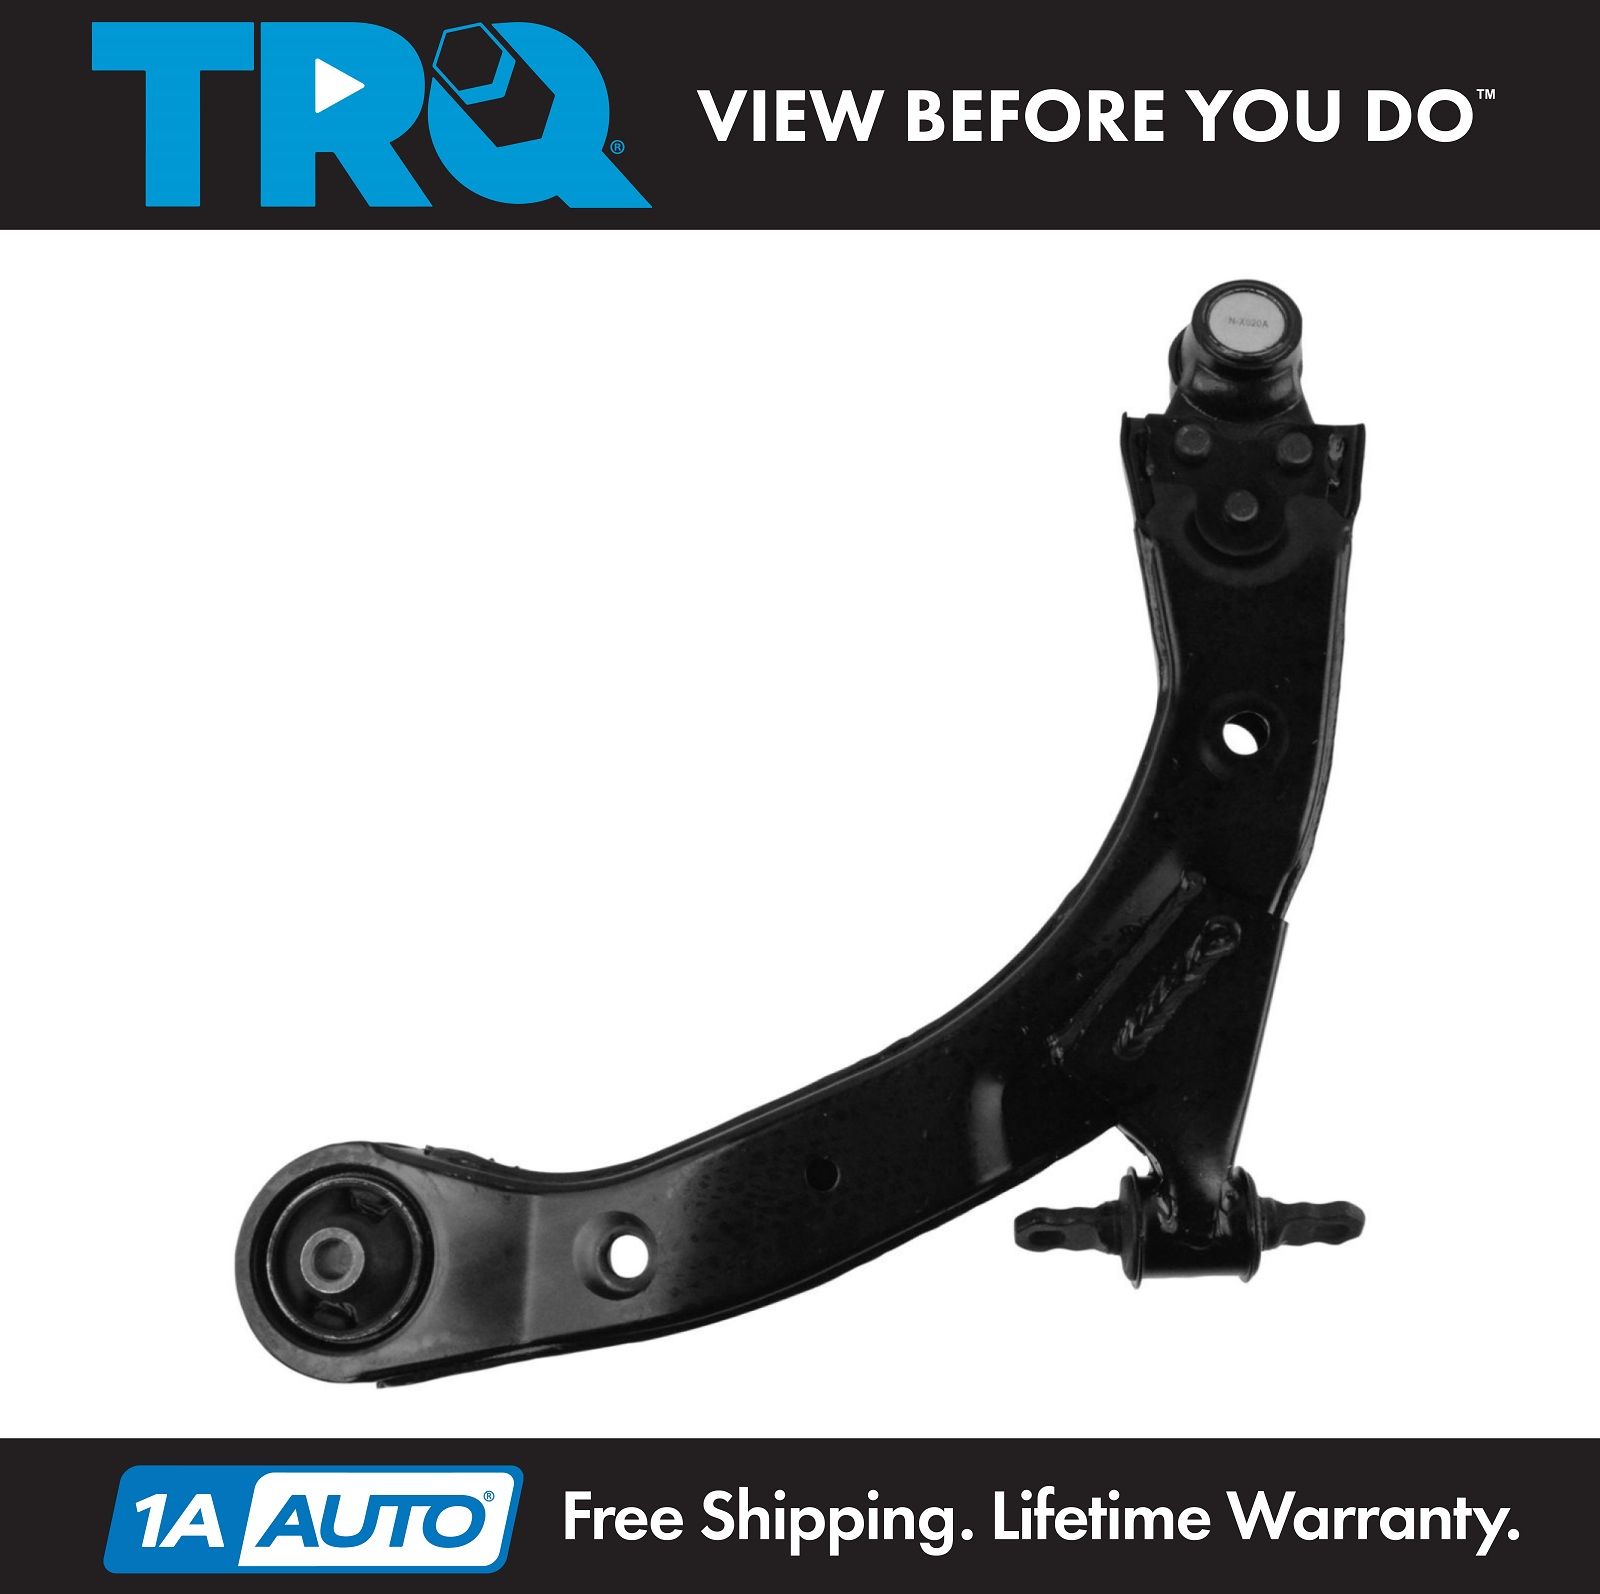 2 Front Lower Control Arms W/Ball Joint Bushings For Cobalt G5 HHR Pursuit W/Fe1